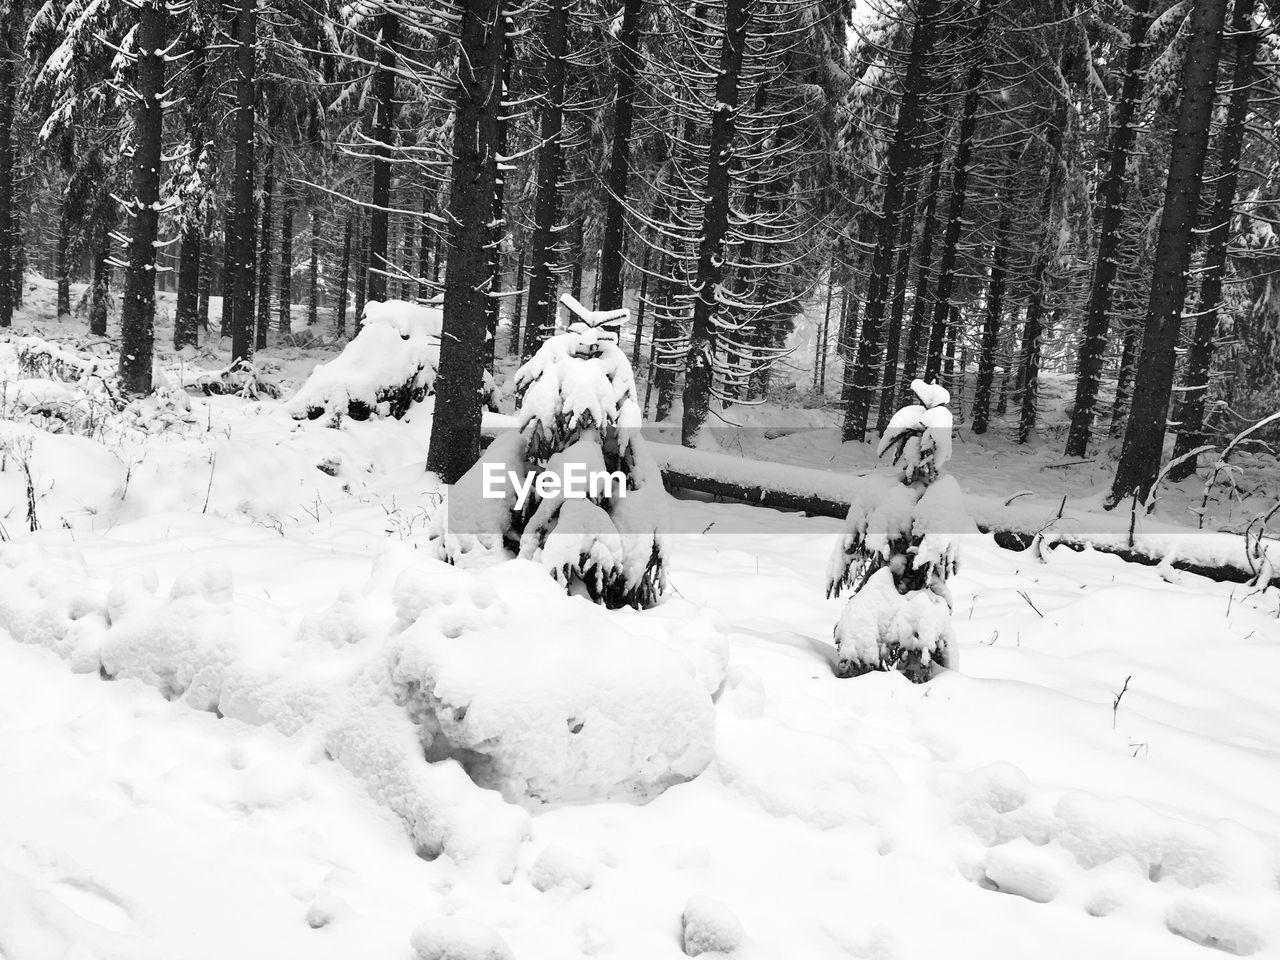 SNOW ON TREES IN FOREST